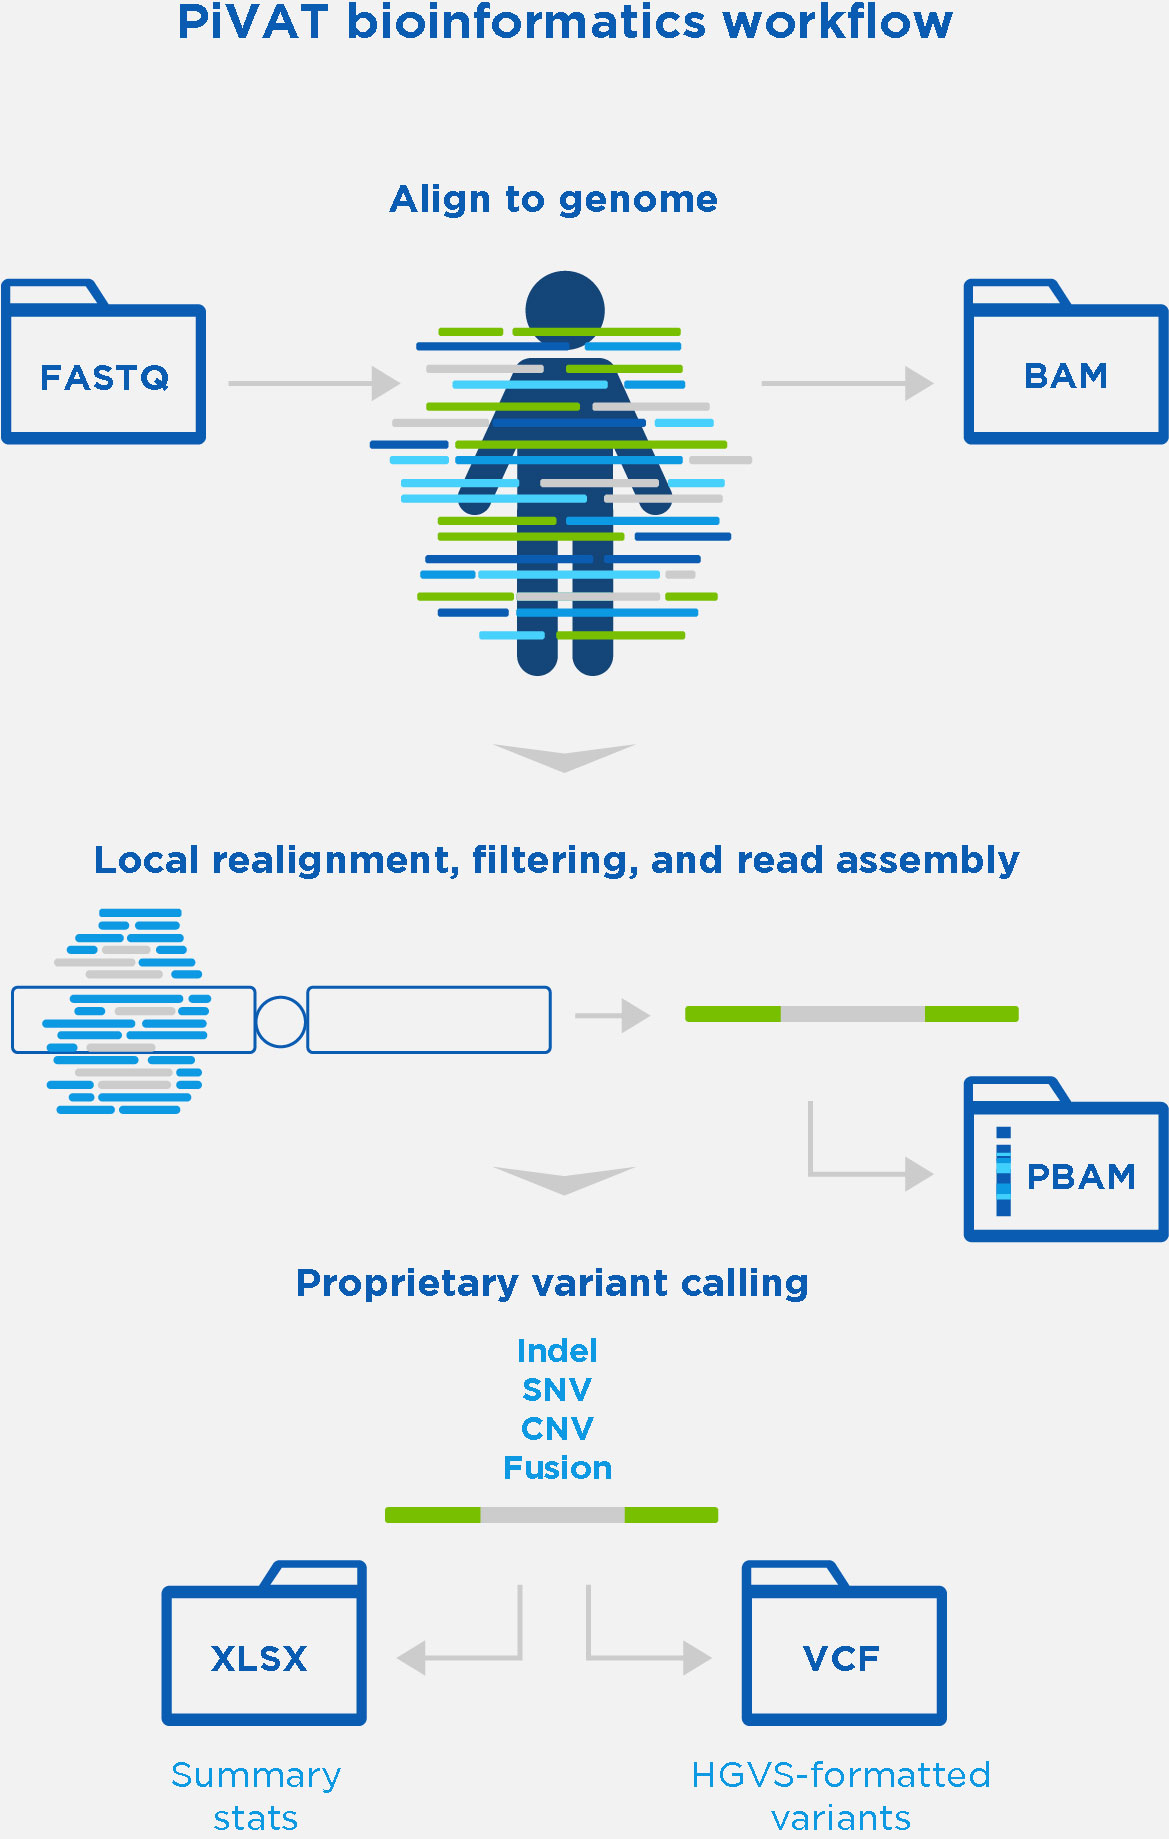 Pillar Biosciences PiVAT bioinformatics worfklow: 1) Align to genome, 2) Local realignment, filtering, and read assembly, 3) Proprietary variant calling